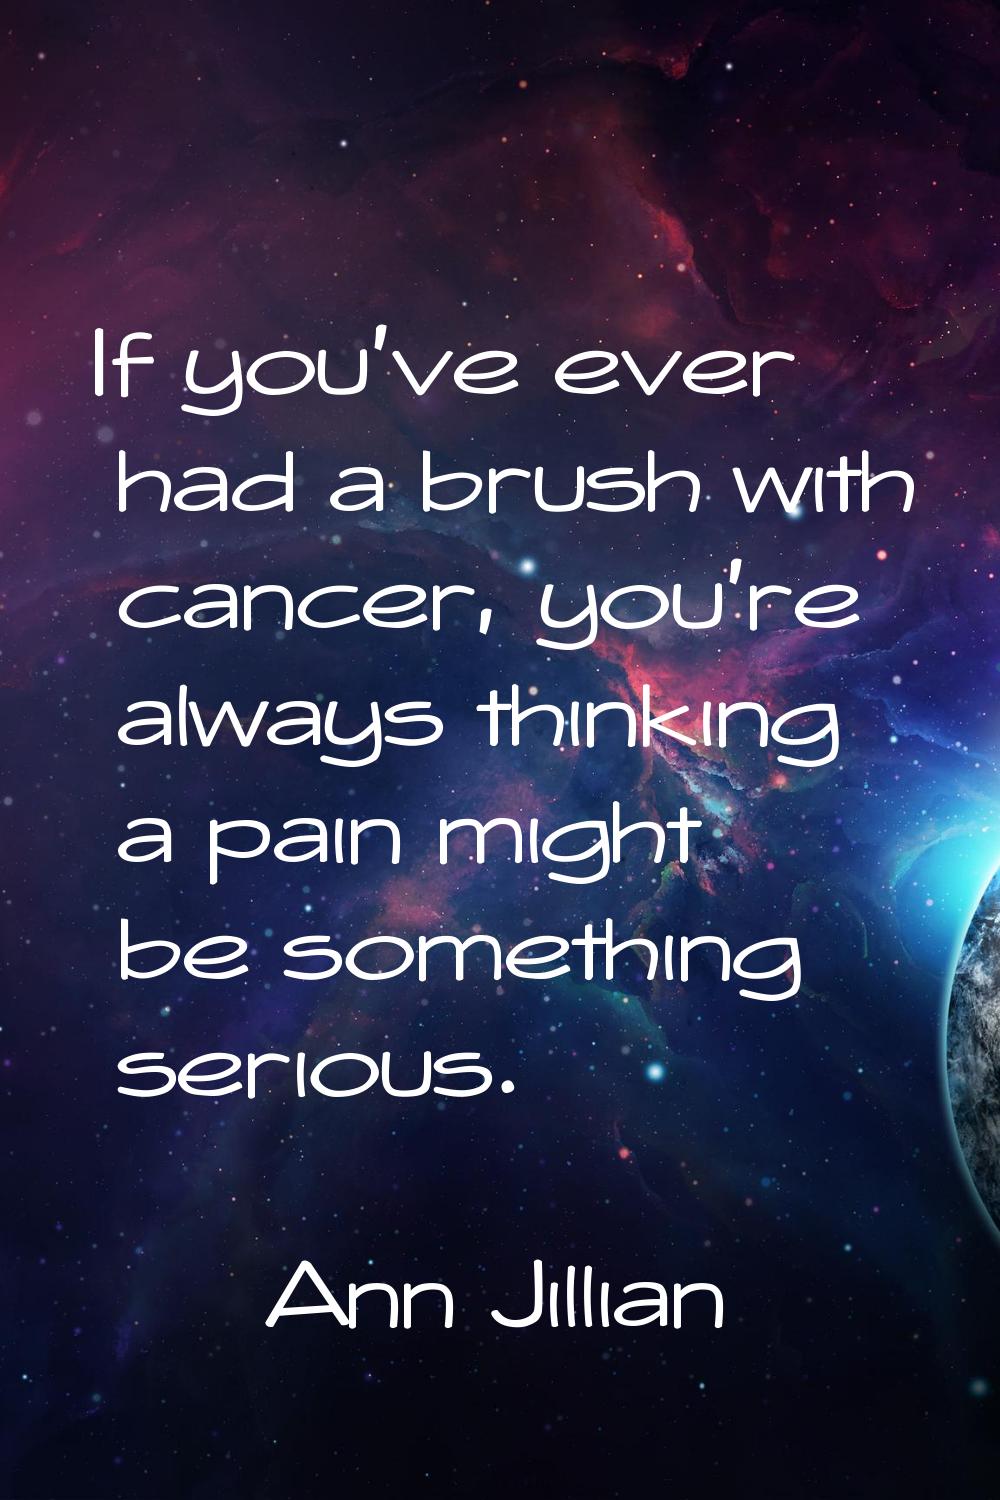 If you've ever had a brush with cancer, you're always thinking a pain might be something serious.